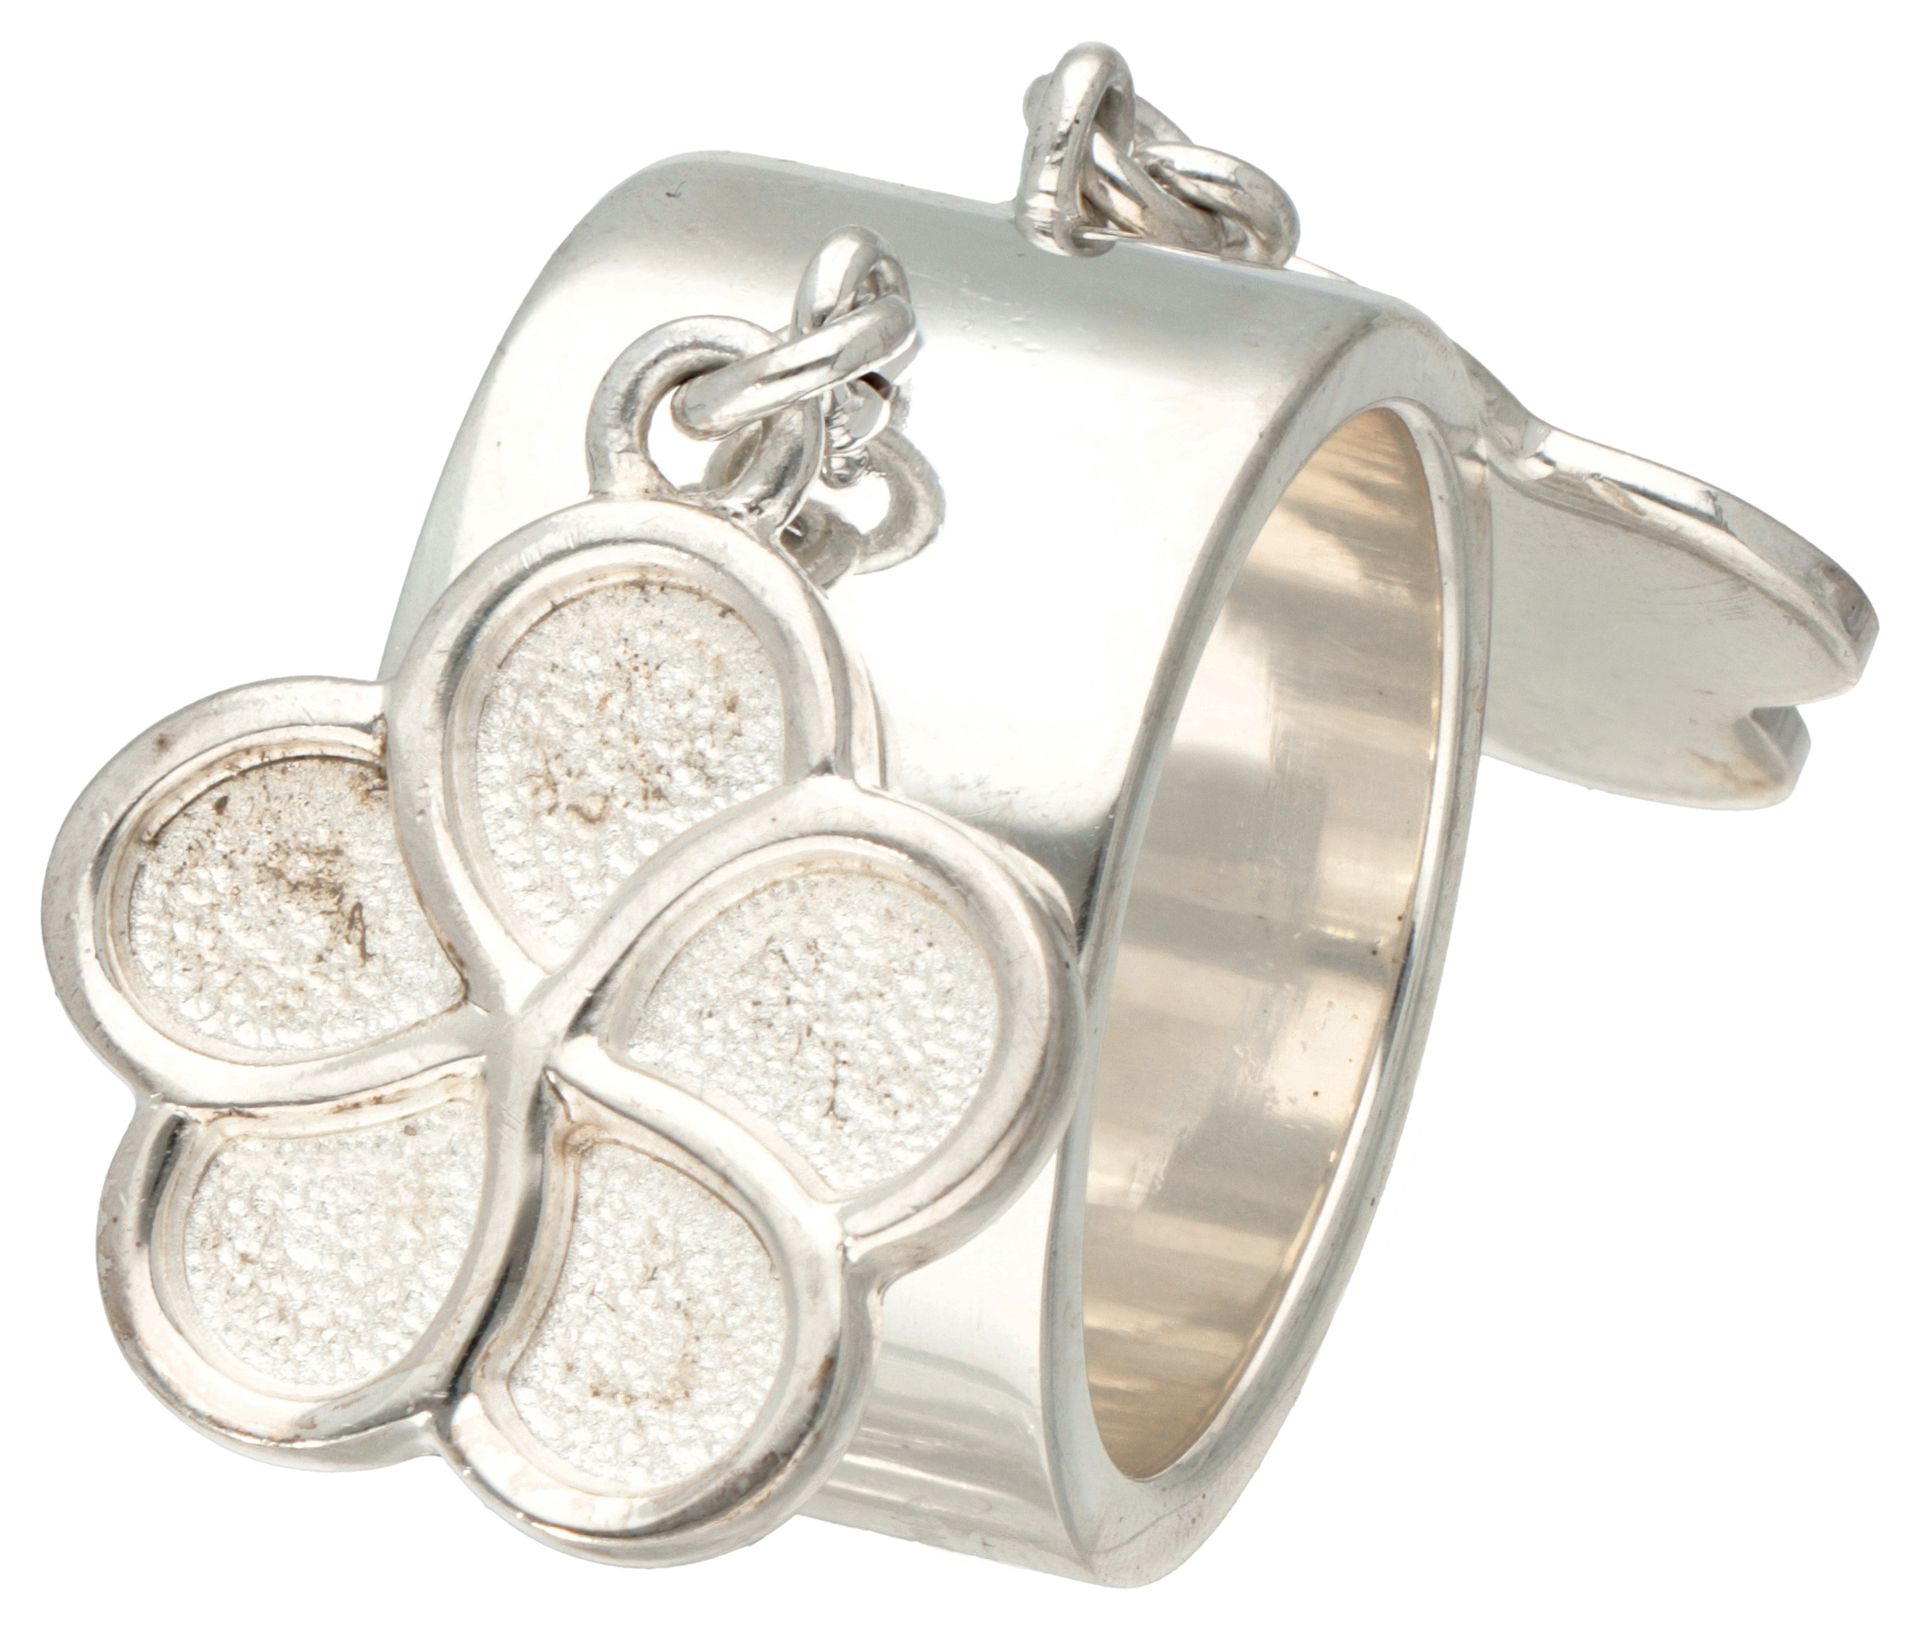 Sterling silver Christofle band ring with two flower-shaped charms. Punzierungen&hellip;